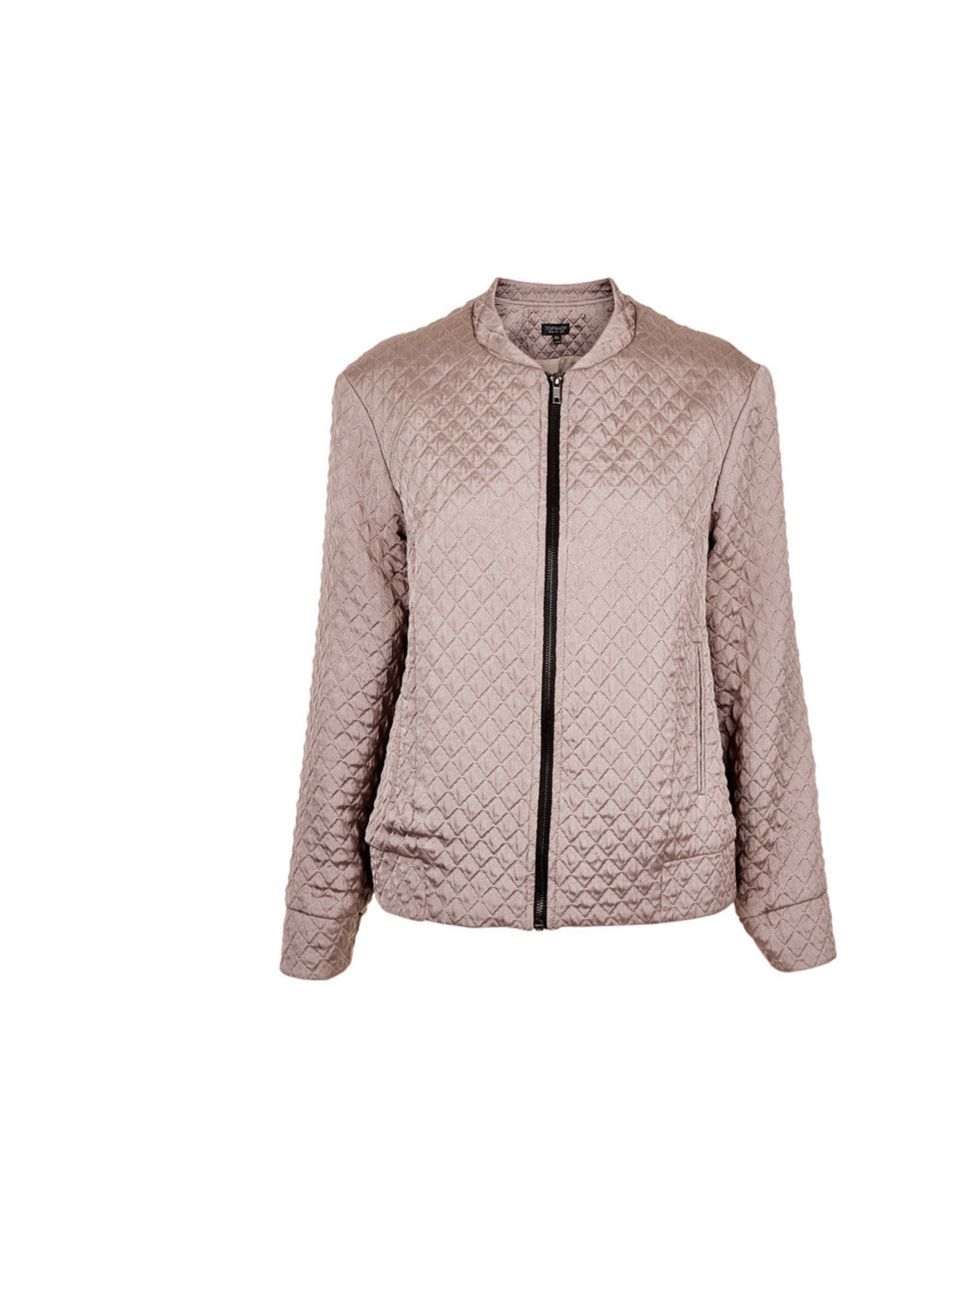 <p>Topshop quilted bomber jacket, £68</p><p><a href="http://shopping.elleuk.com/browse?fts=topshop+quilted+bomber+jacket">BUY NOW</a></p>